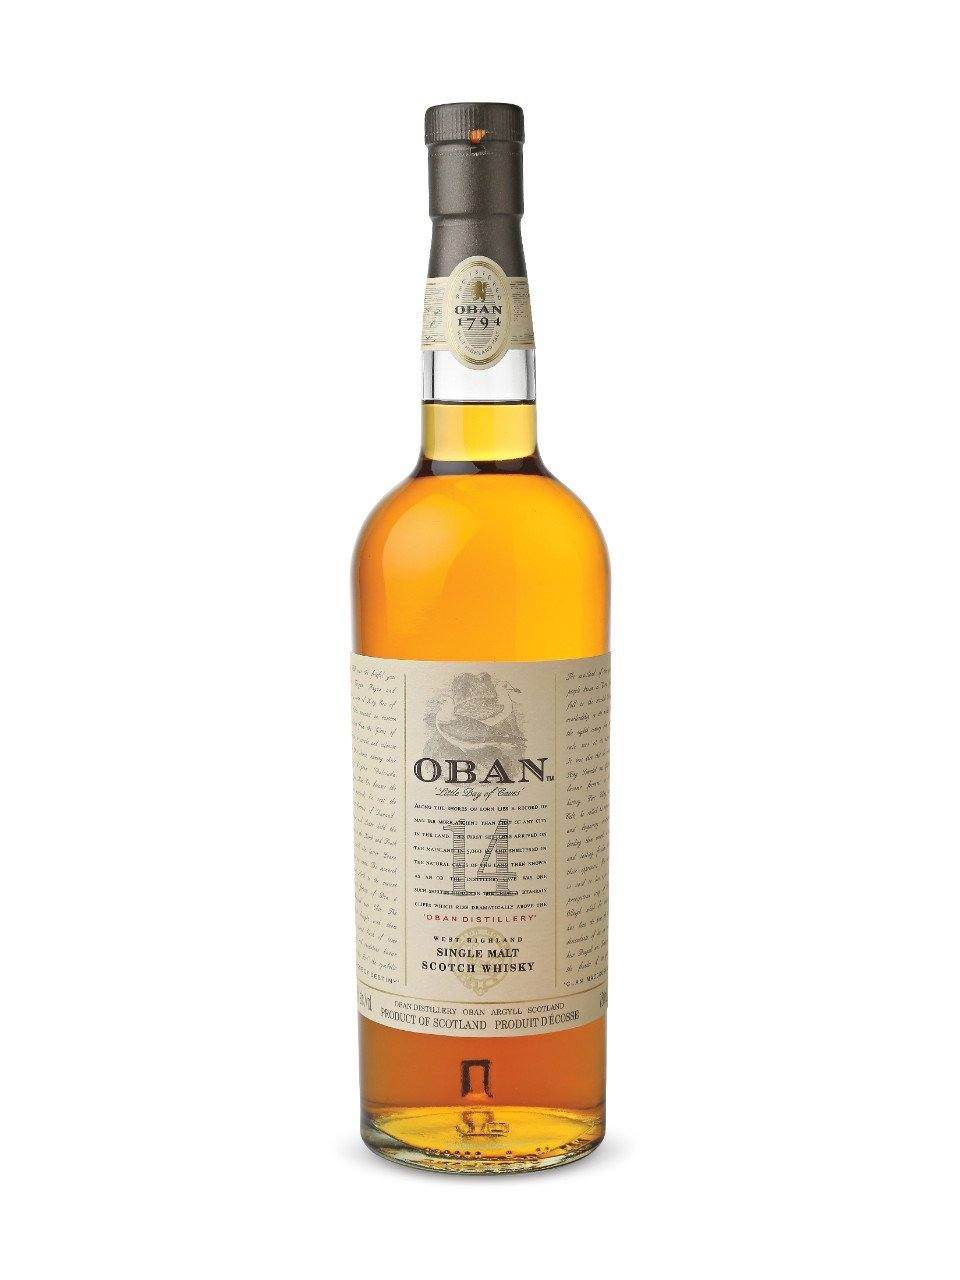 Oban 14 Year Old Single Malt Scotch Whisky | Exquisite Wine & Alcohol Gift Delivery Toronto Canada | Vyno